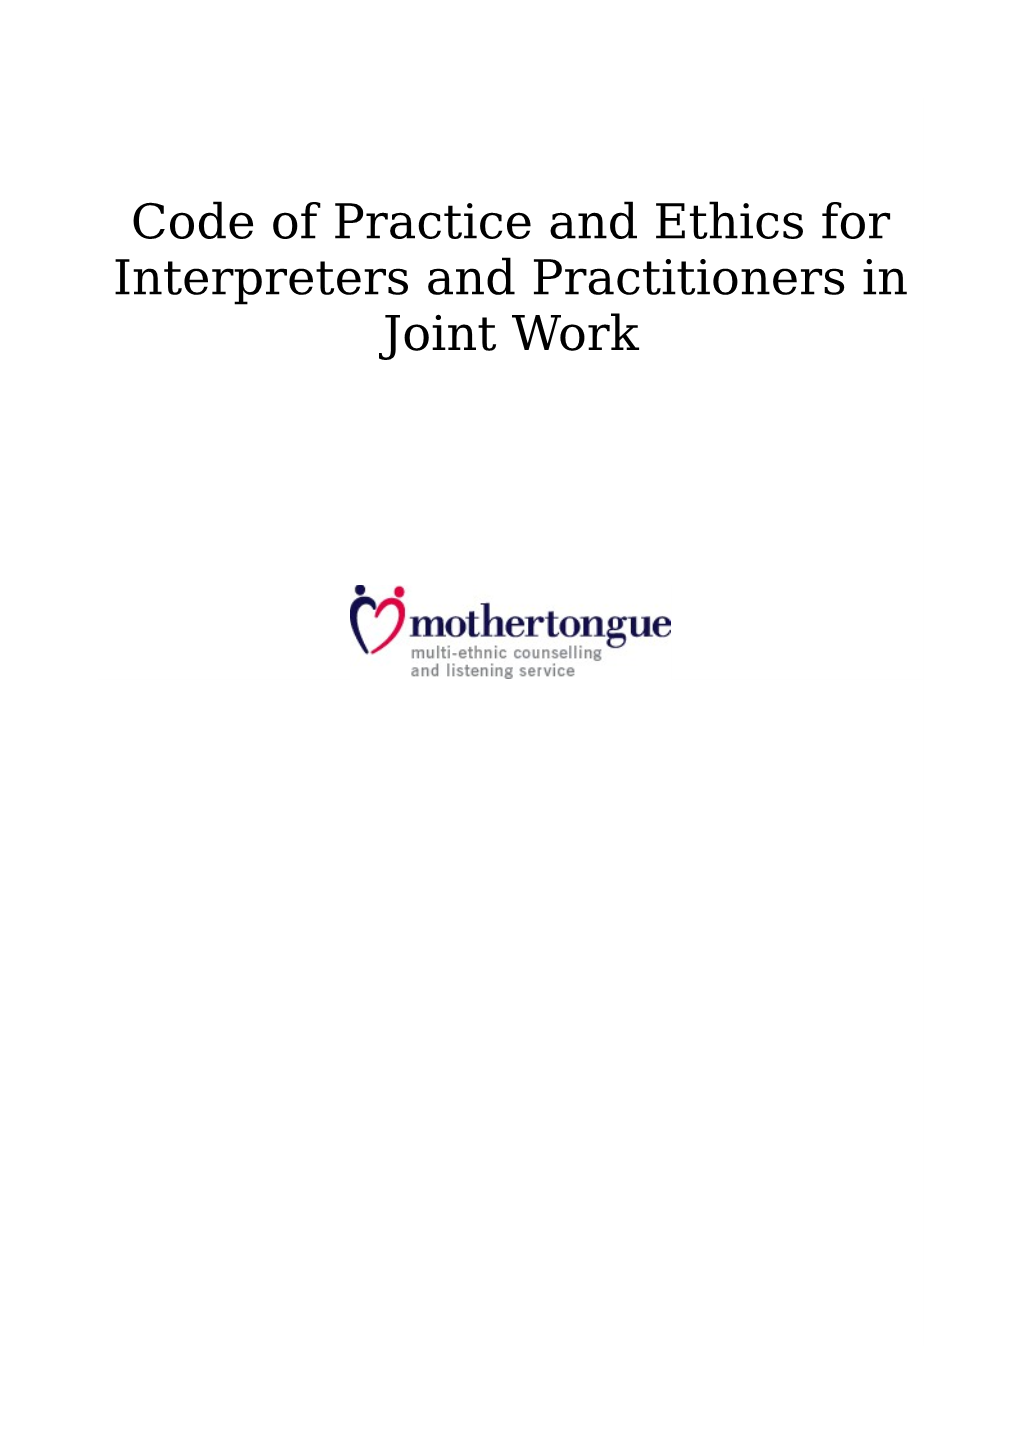 Code of Practice and Ethics for Interpreters and Practitioners in Joint Work